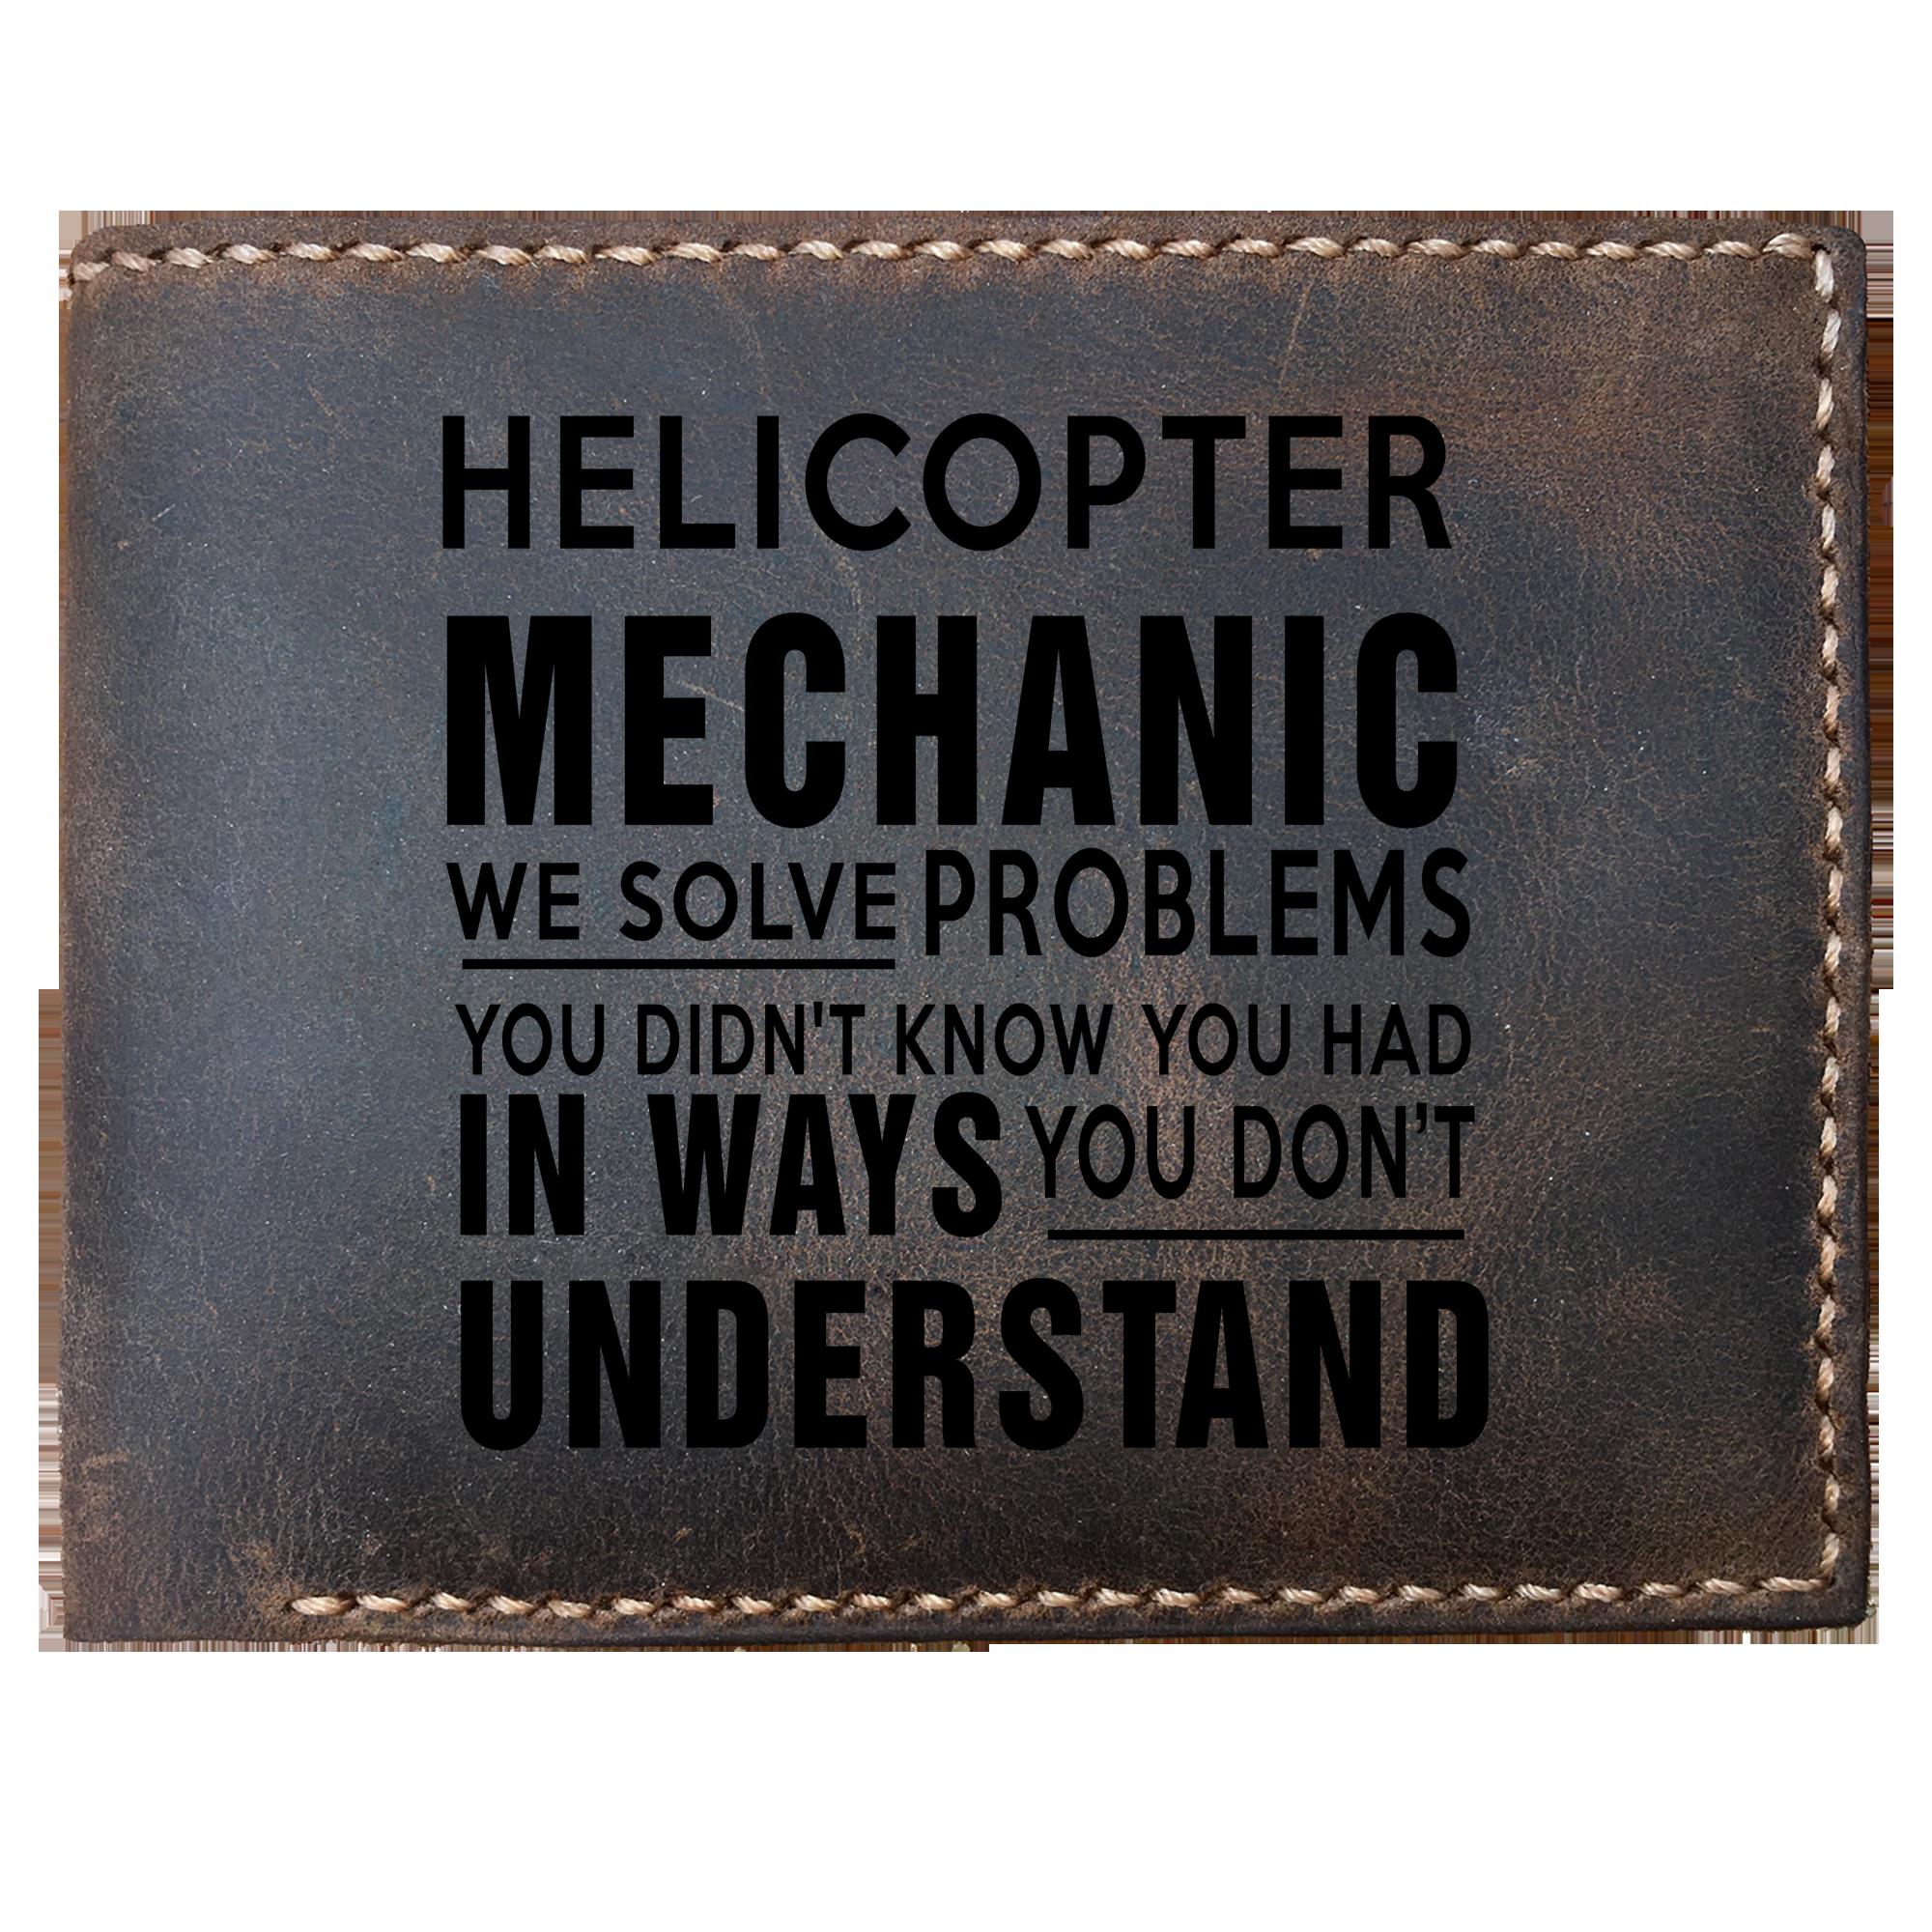 Skitongifts Funny Custom Laser Engraved Bifold Leather Wallet, Helicopter Mechanic We Solve Problems You Didn't Know You Had In Ways